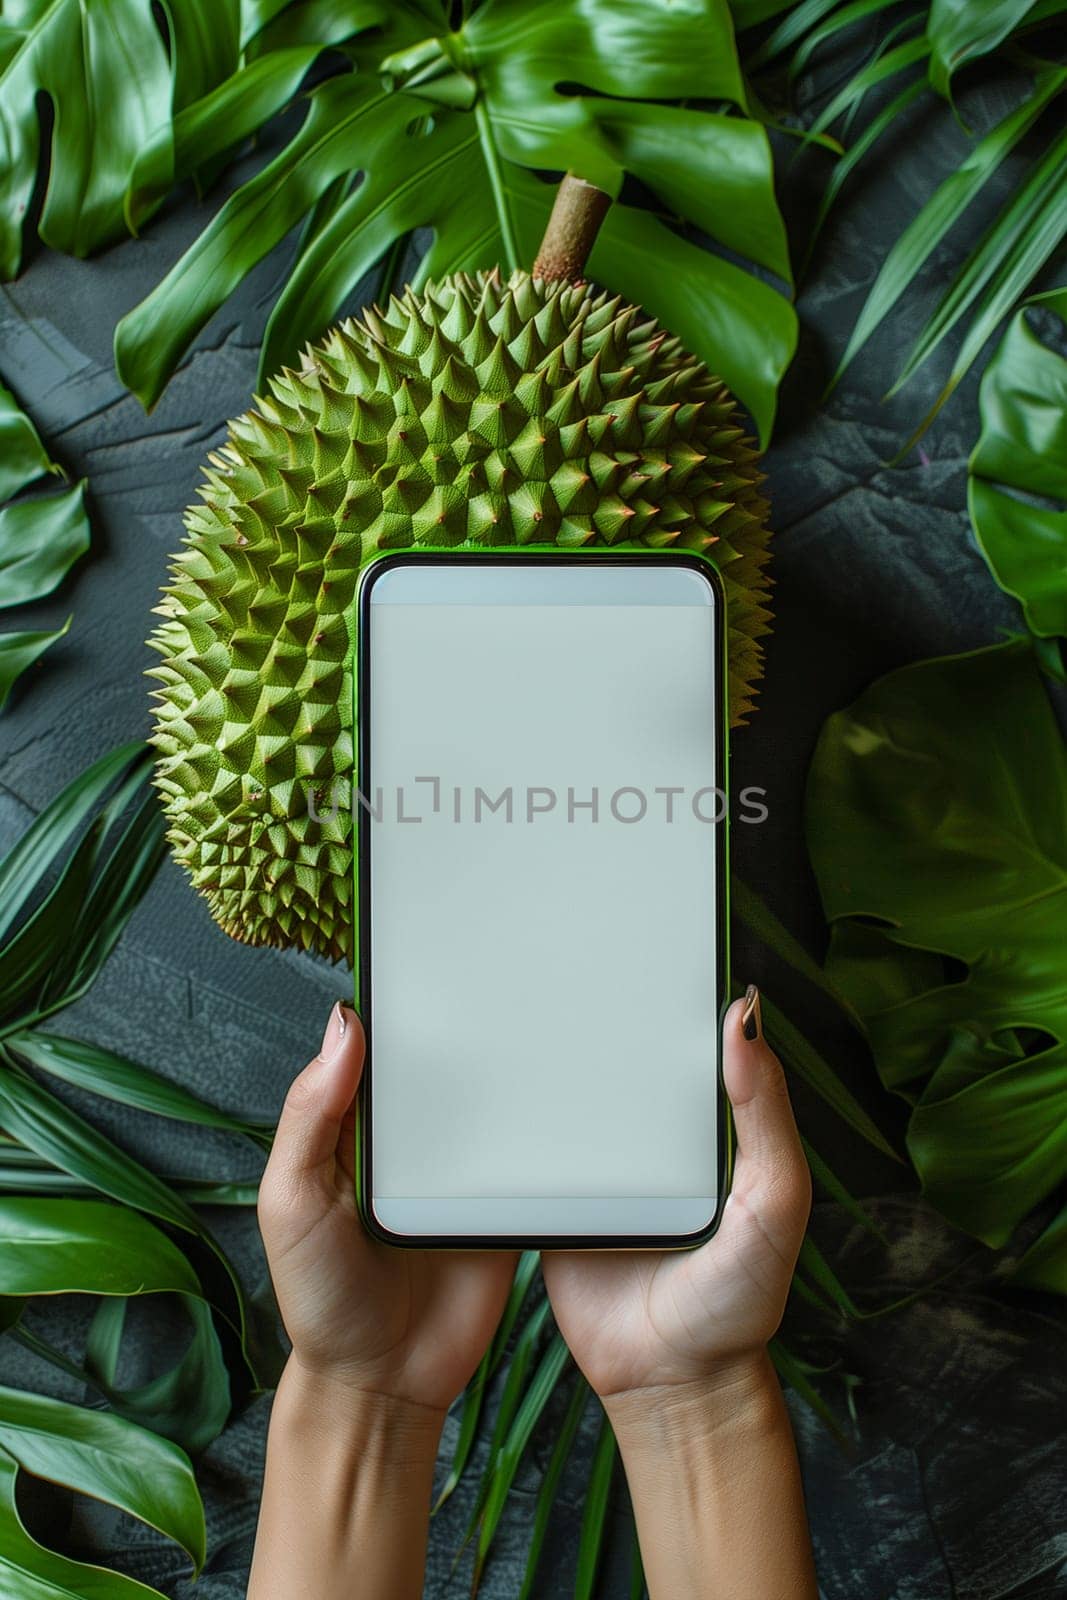 A person standing and holding a smartphone with a durian fruit displayed on the screen.